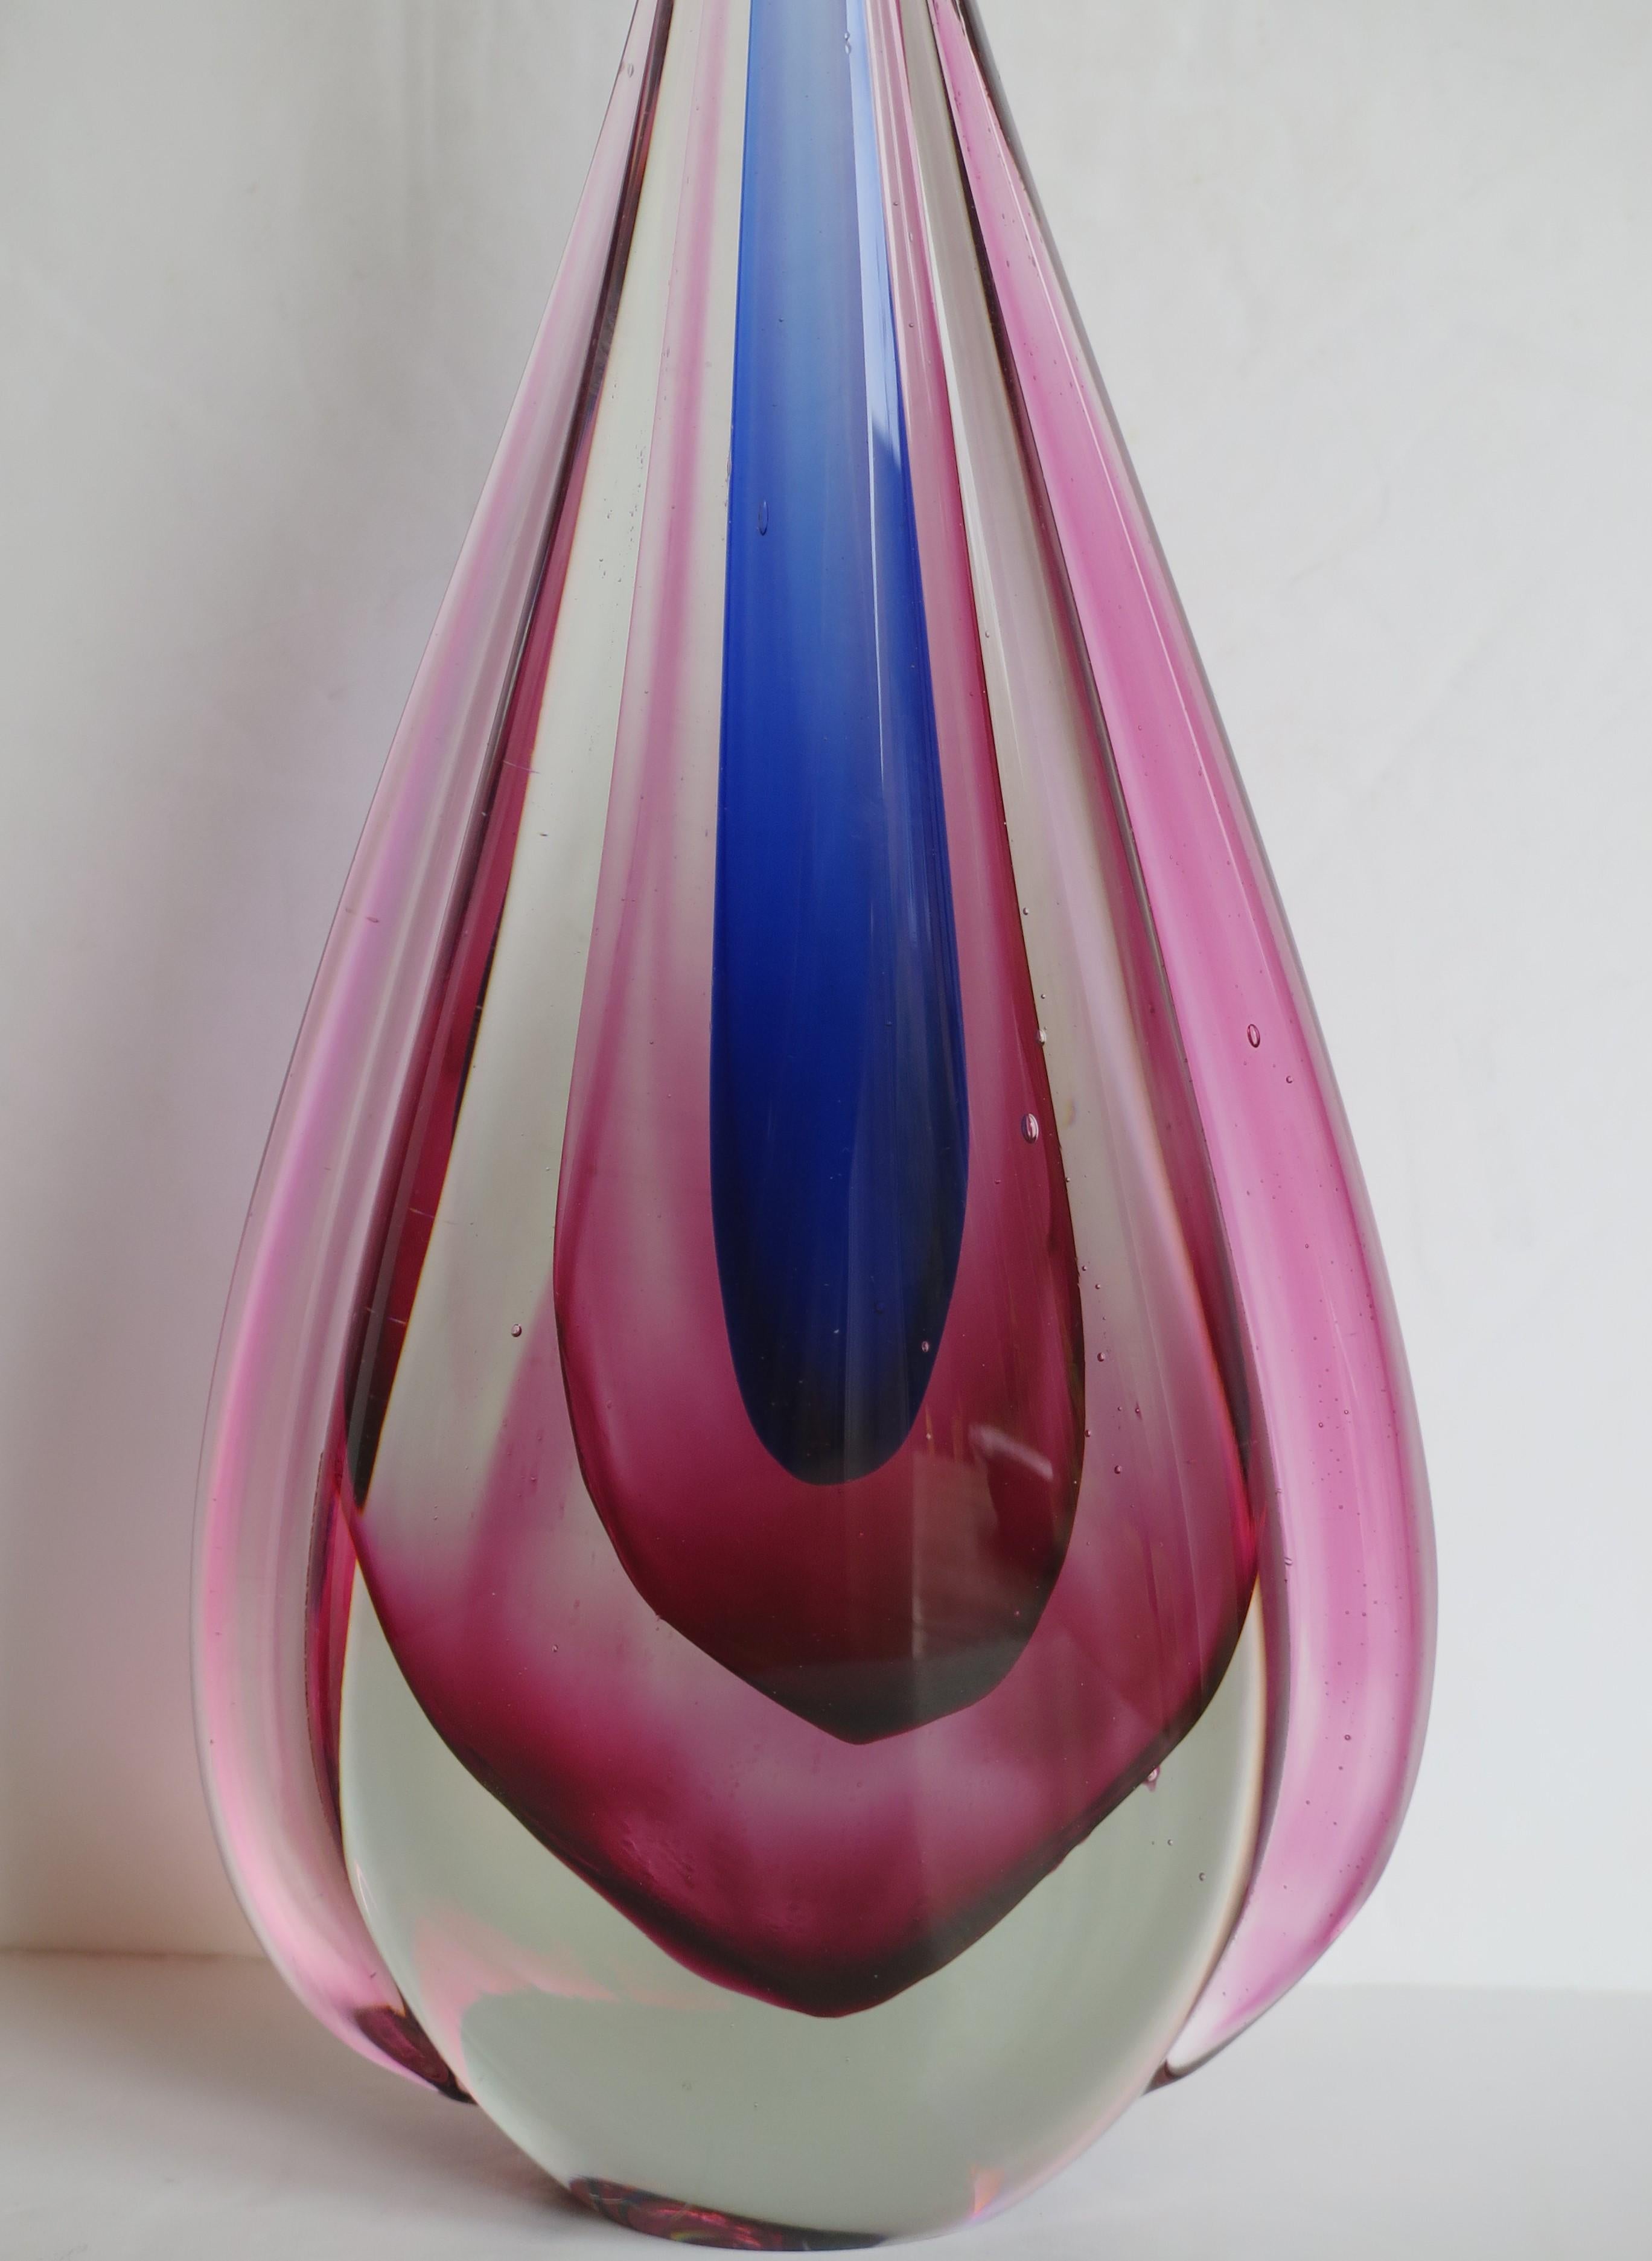 Tall Murano Glass Sommerso Teardrop Sculpture by Flavio Poli, Italy, circa 1950s For Sale 4